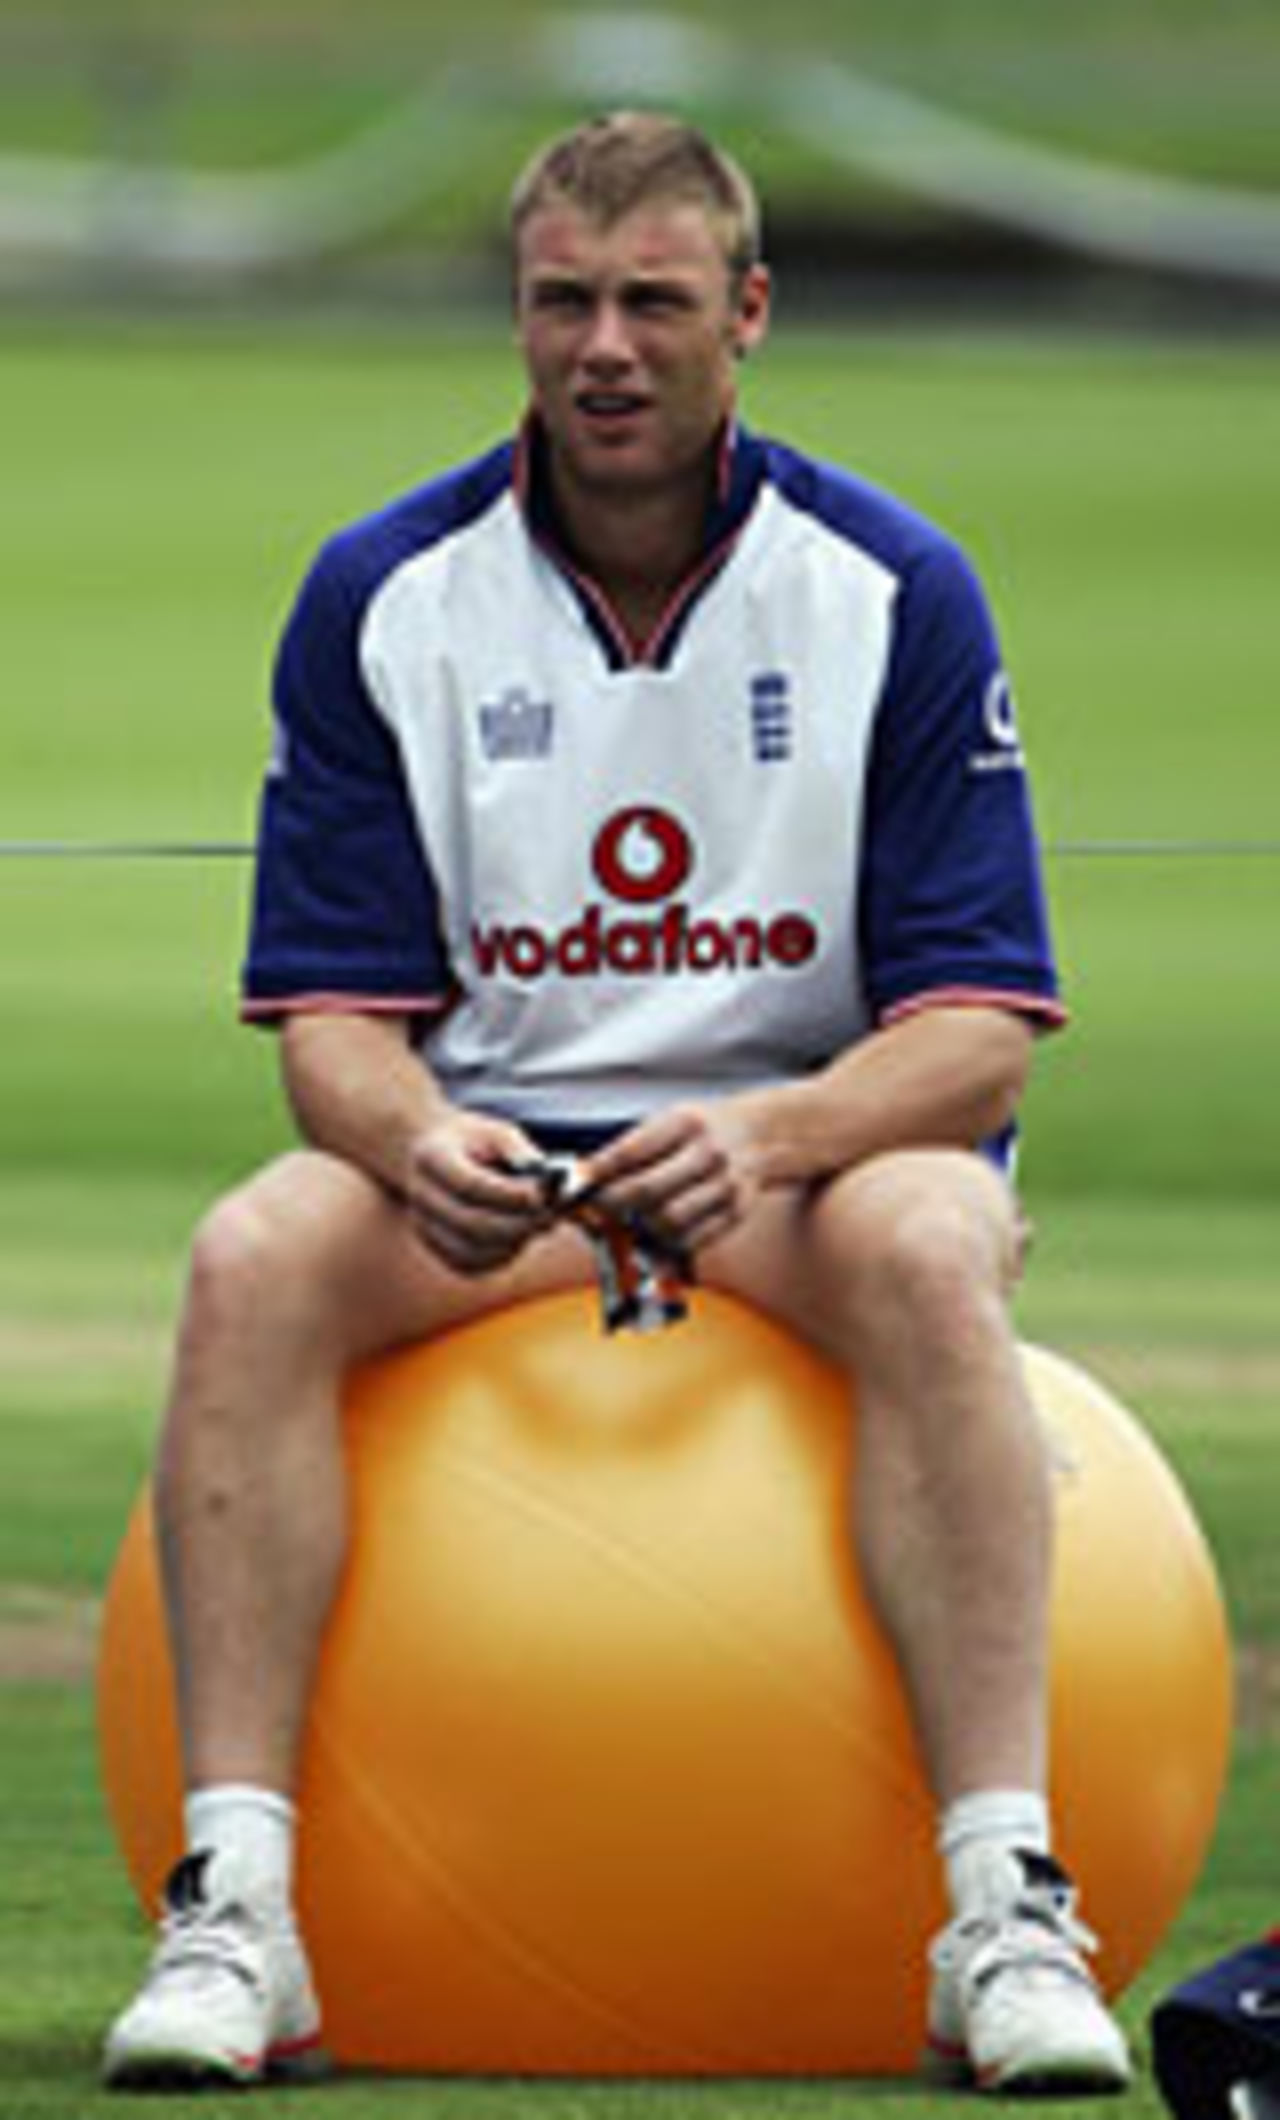 Andrew Flintoff sitting on a ball during an England training session, December 15 2004